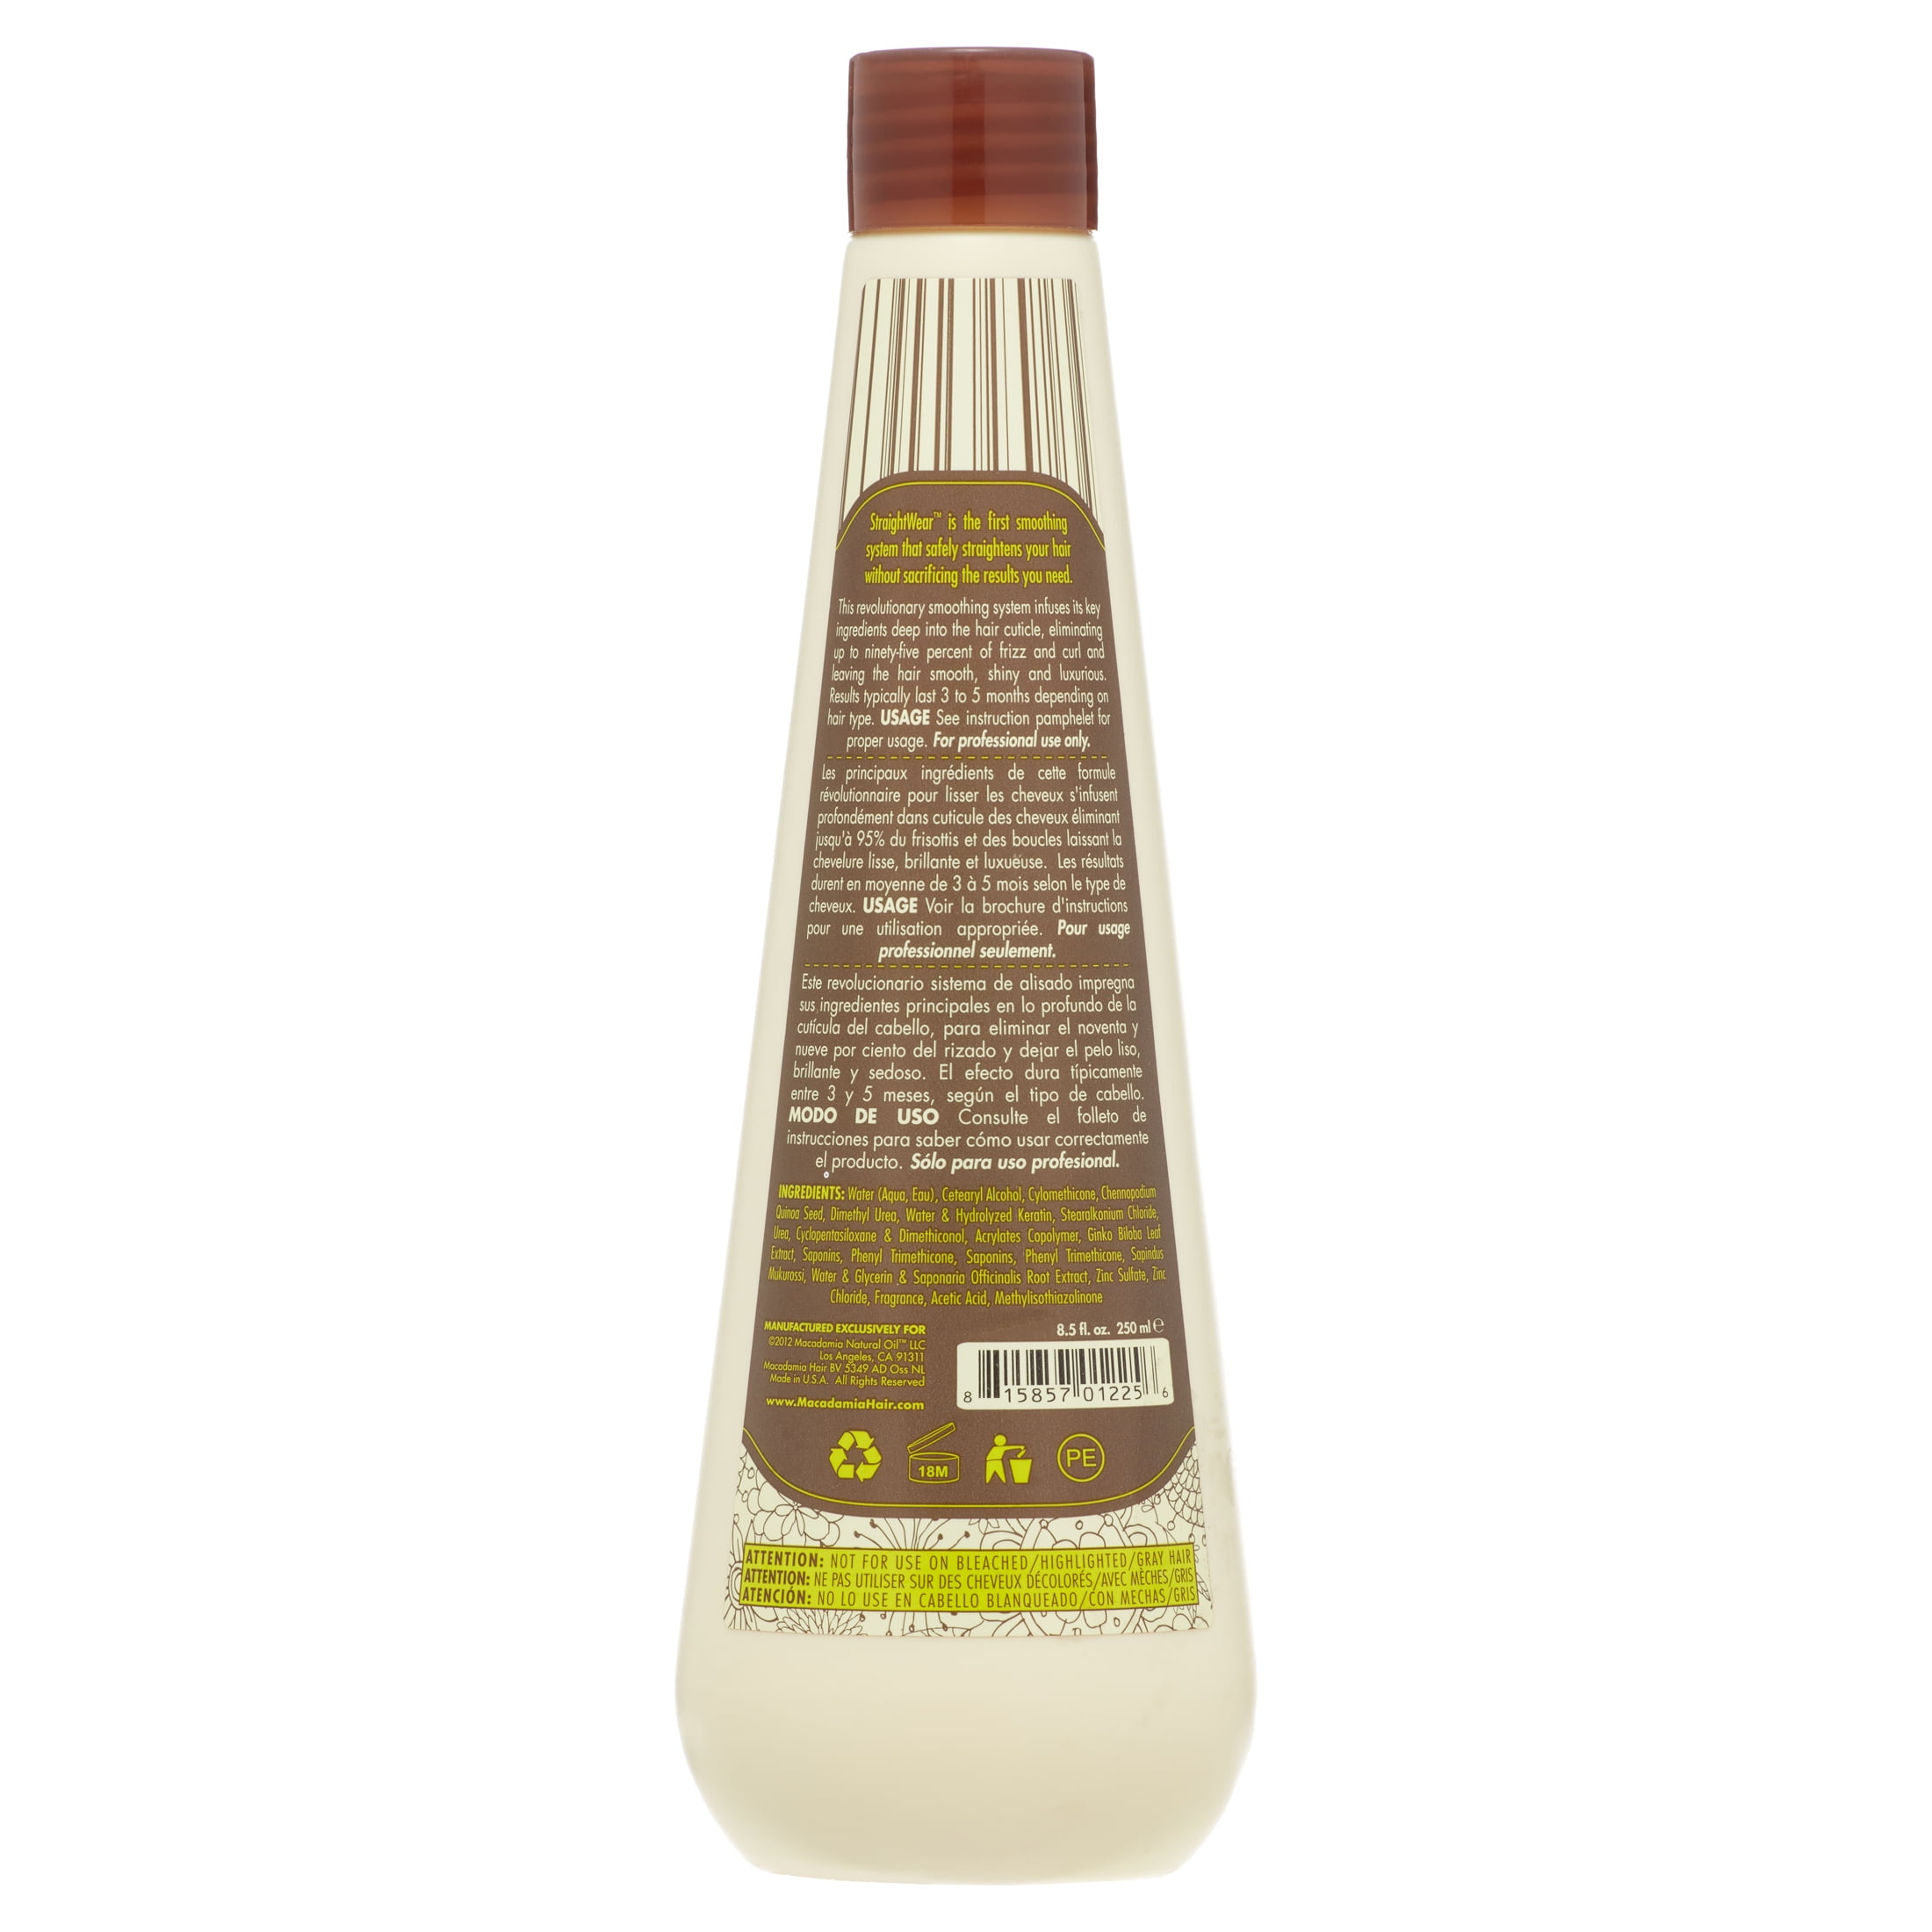 Trampe Hus velordnet Natural Oil Straightwear Smoother Straightening Solution By Macadamia Oil,  8.5 Oz - Walmart.com